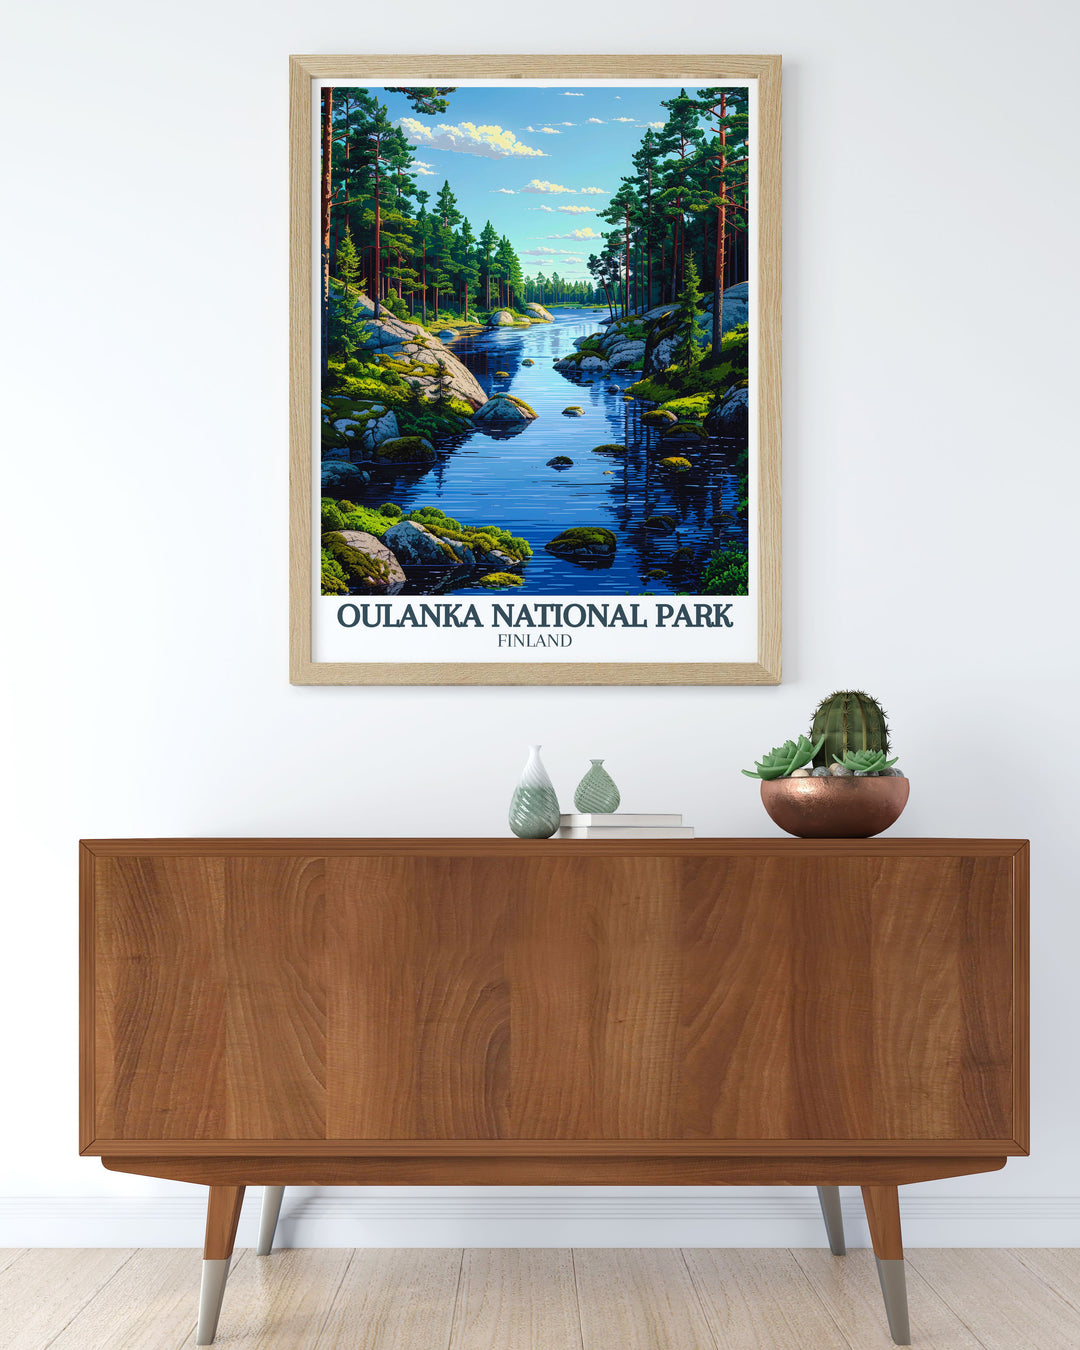 Scenic Oulanka river Kiutakongas Rapids travel poster. Perfect for anyone who loves Finlands natural beauty and hiking trails. This national park print adds a touch of elegance to any room and makes an ideal wall art print gift.